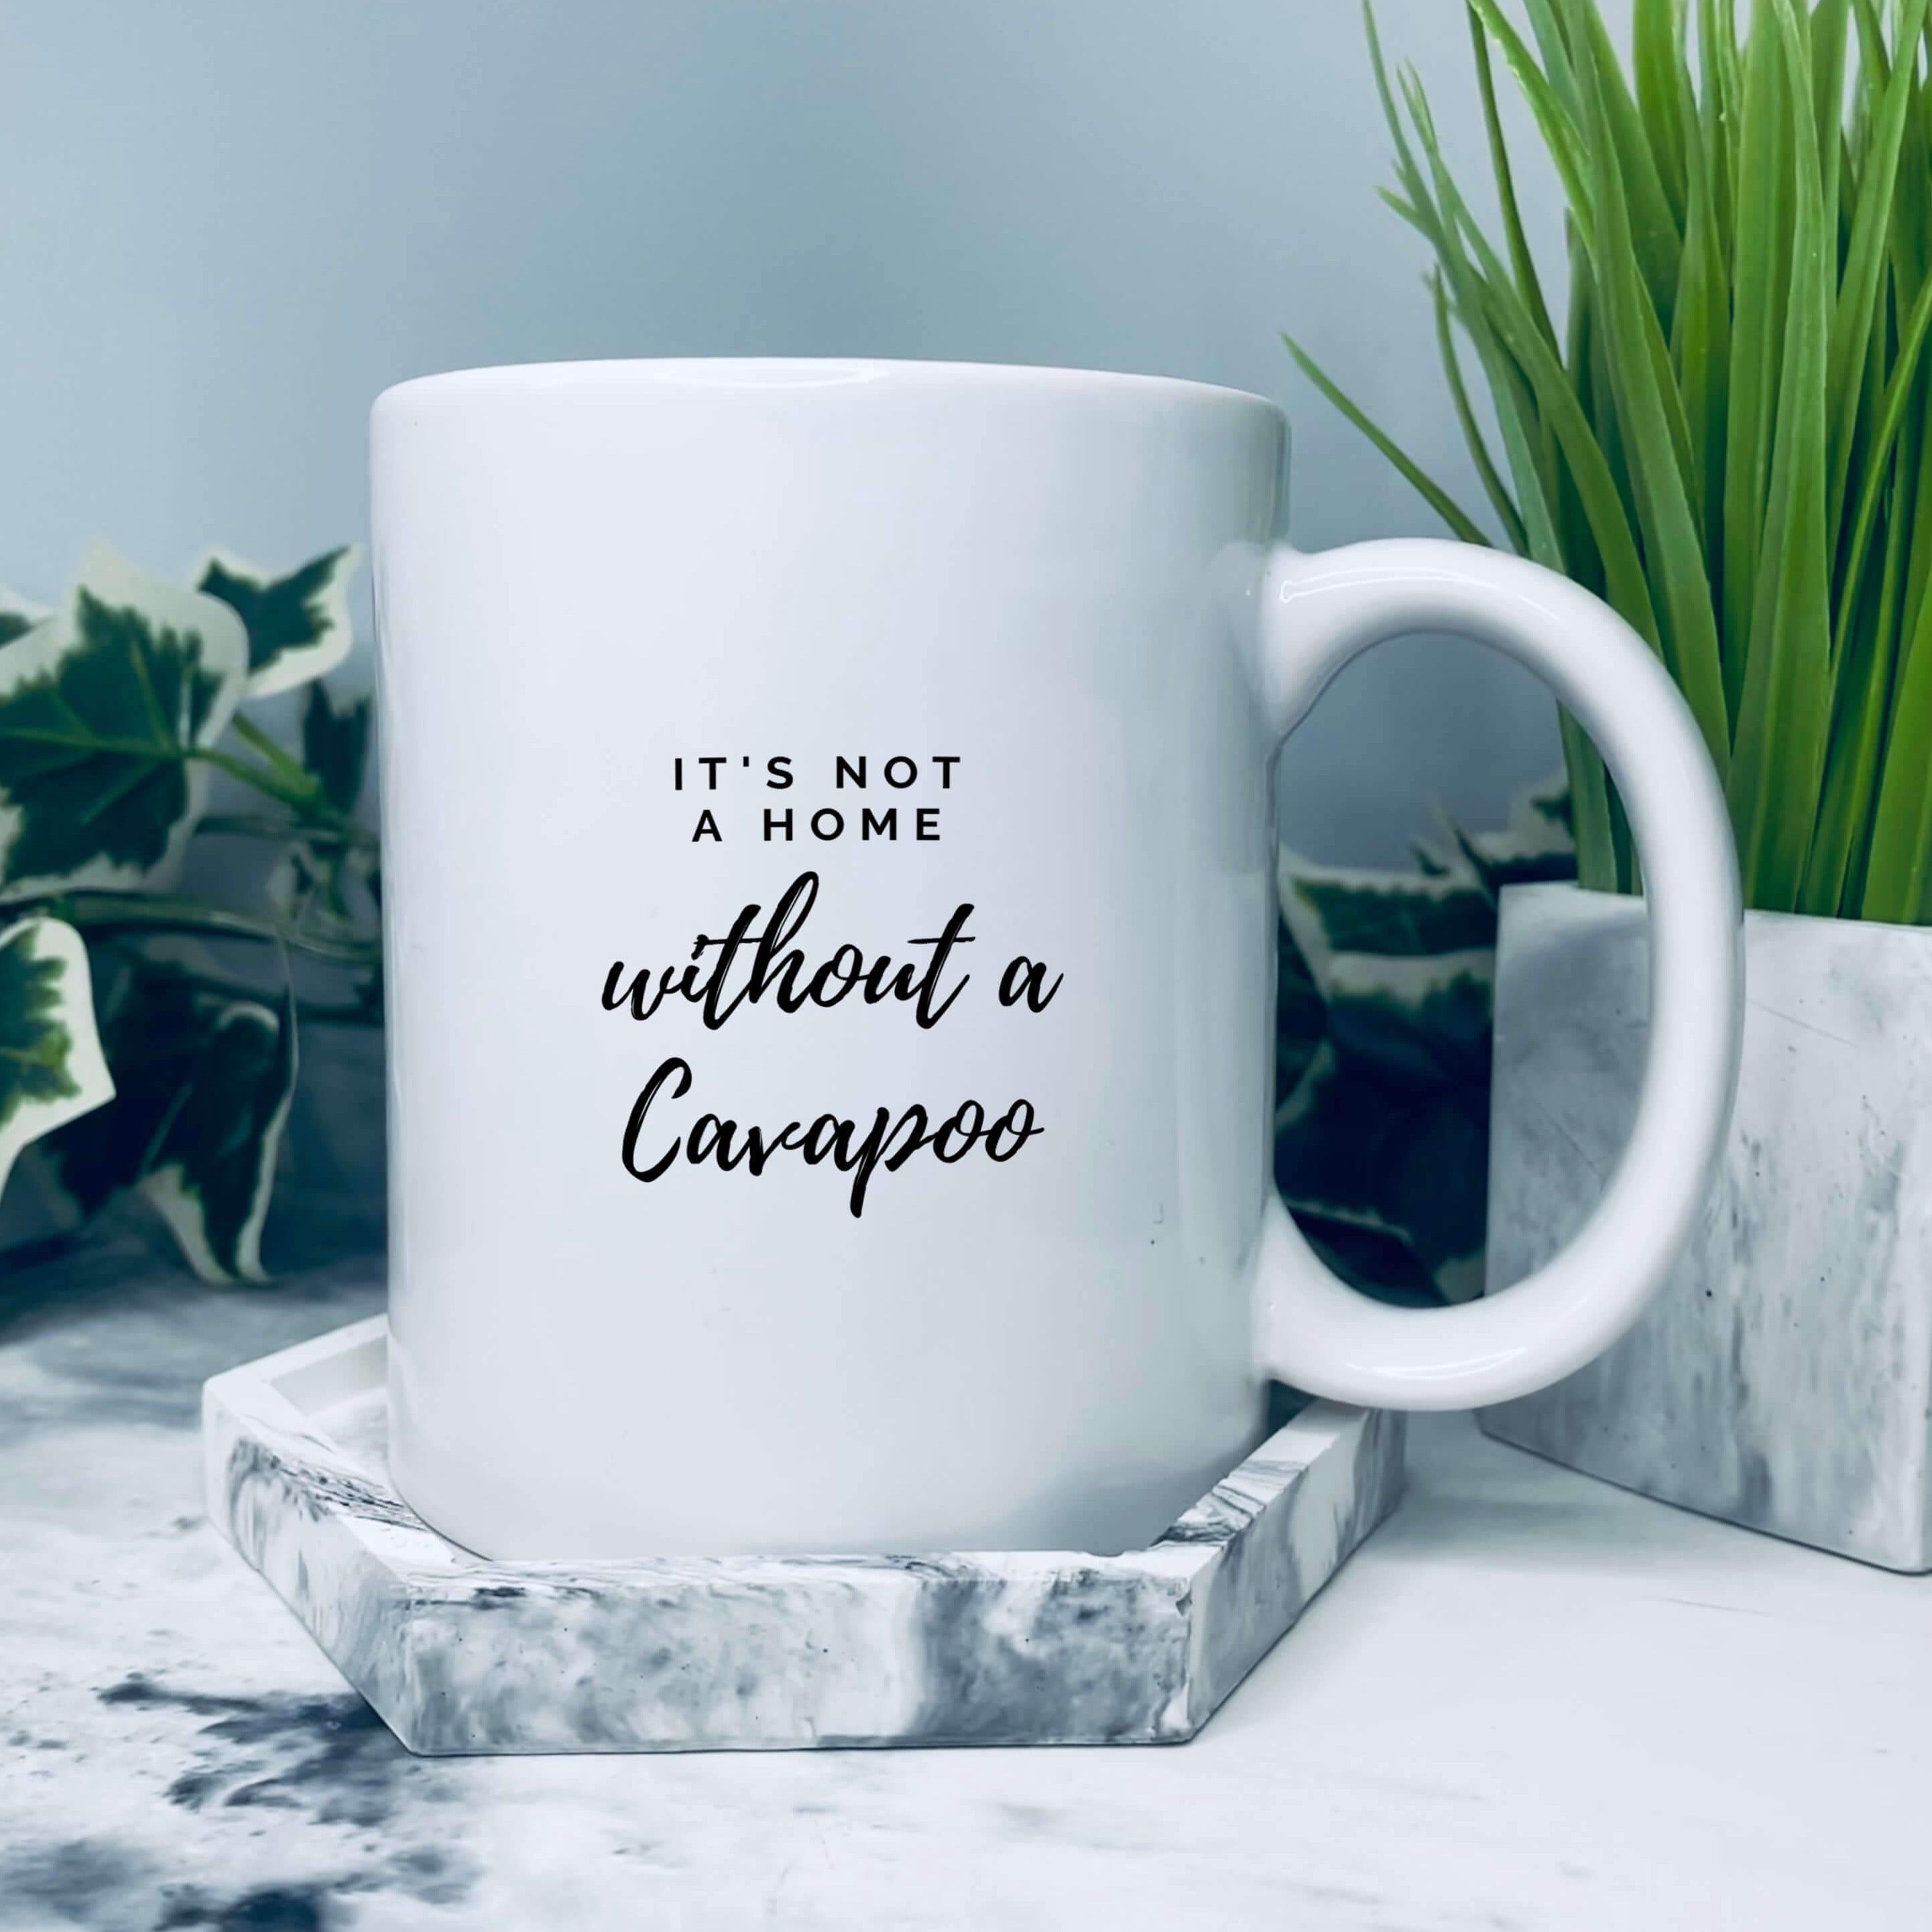 Mug with text on that says: It's not a home without a cavapoo